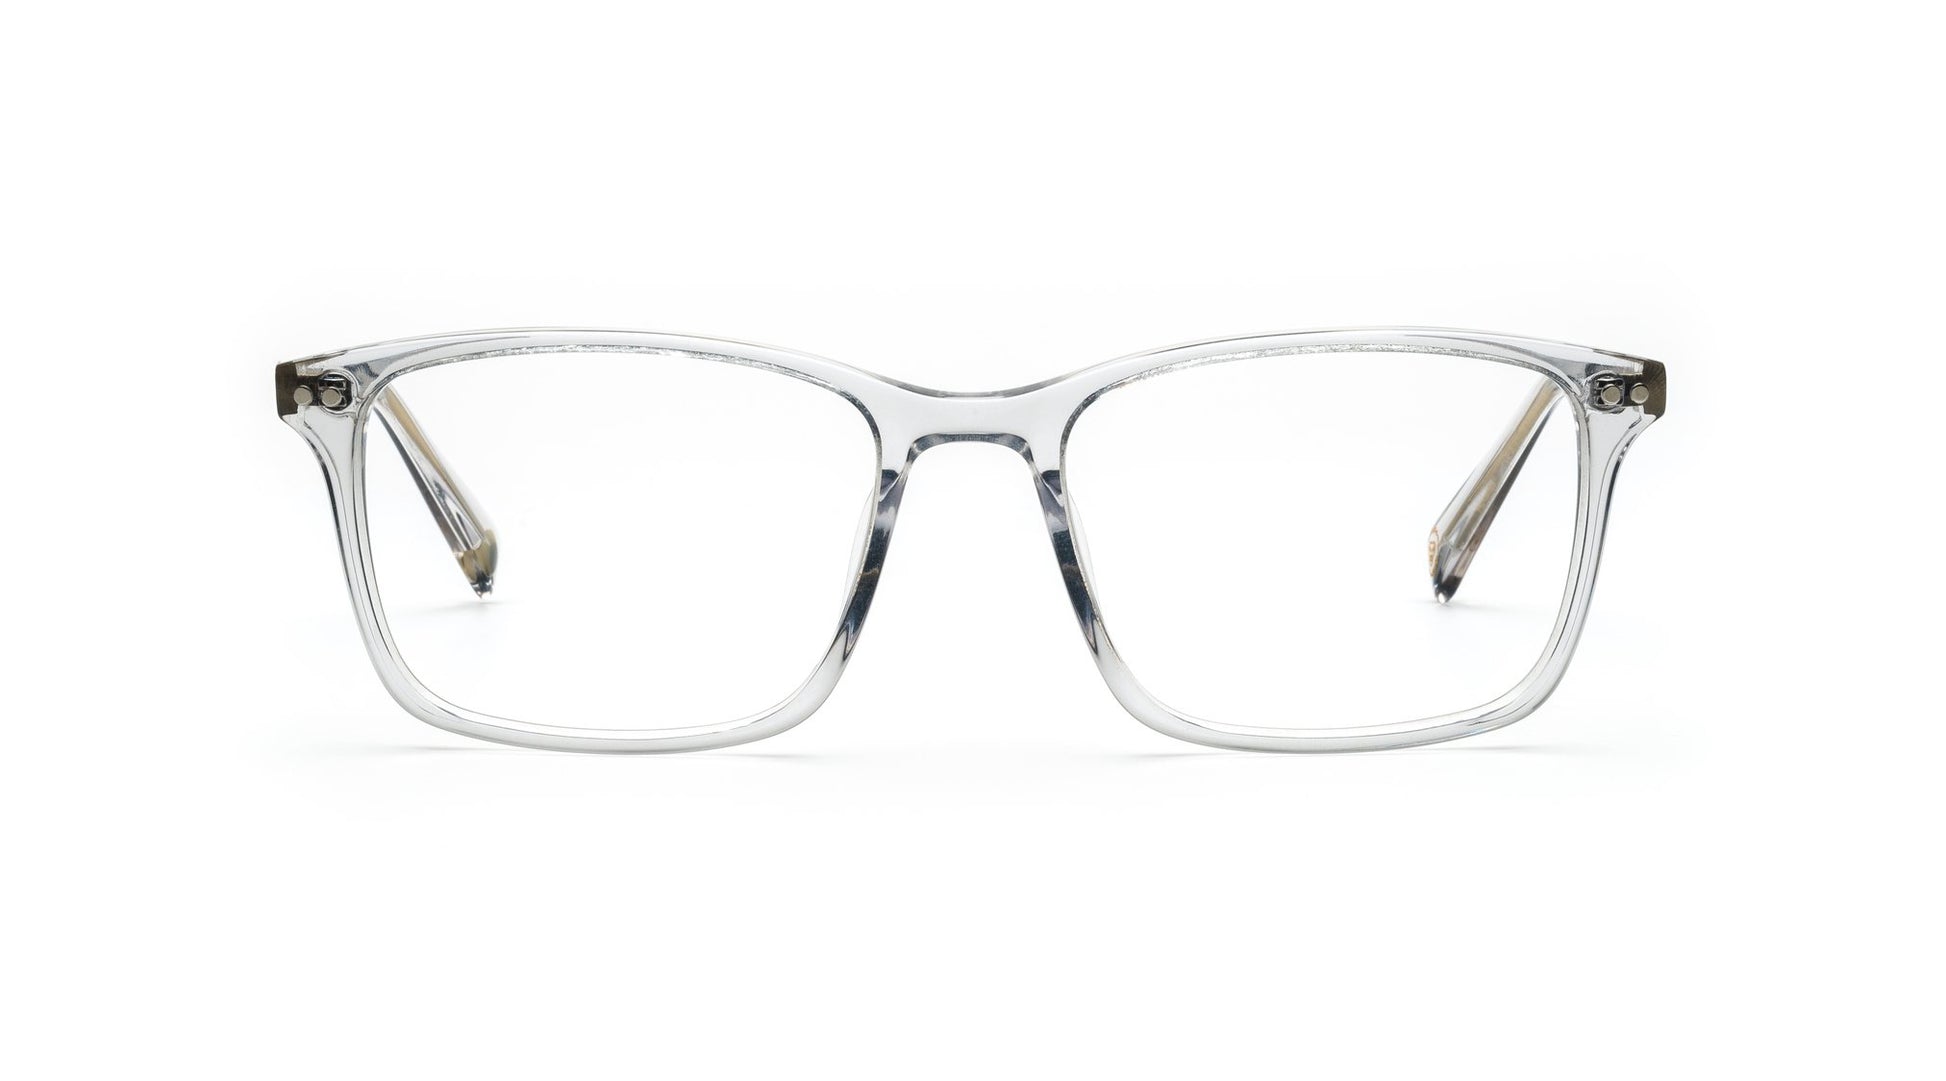 This frame is a bit larger in size and fits like a glove. The Acetate Front and Stainless Steel Temples are made to withstand the harshest punishment.